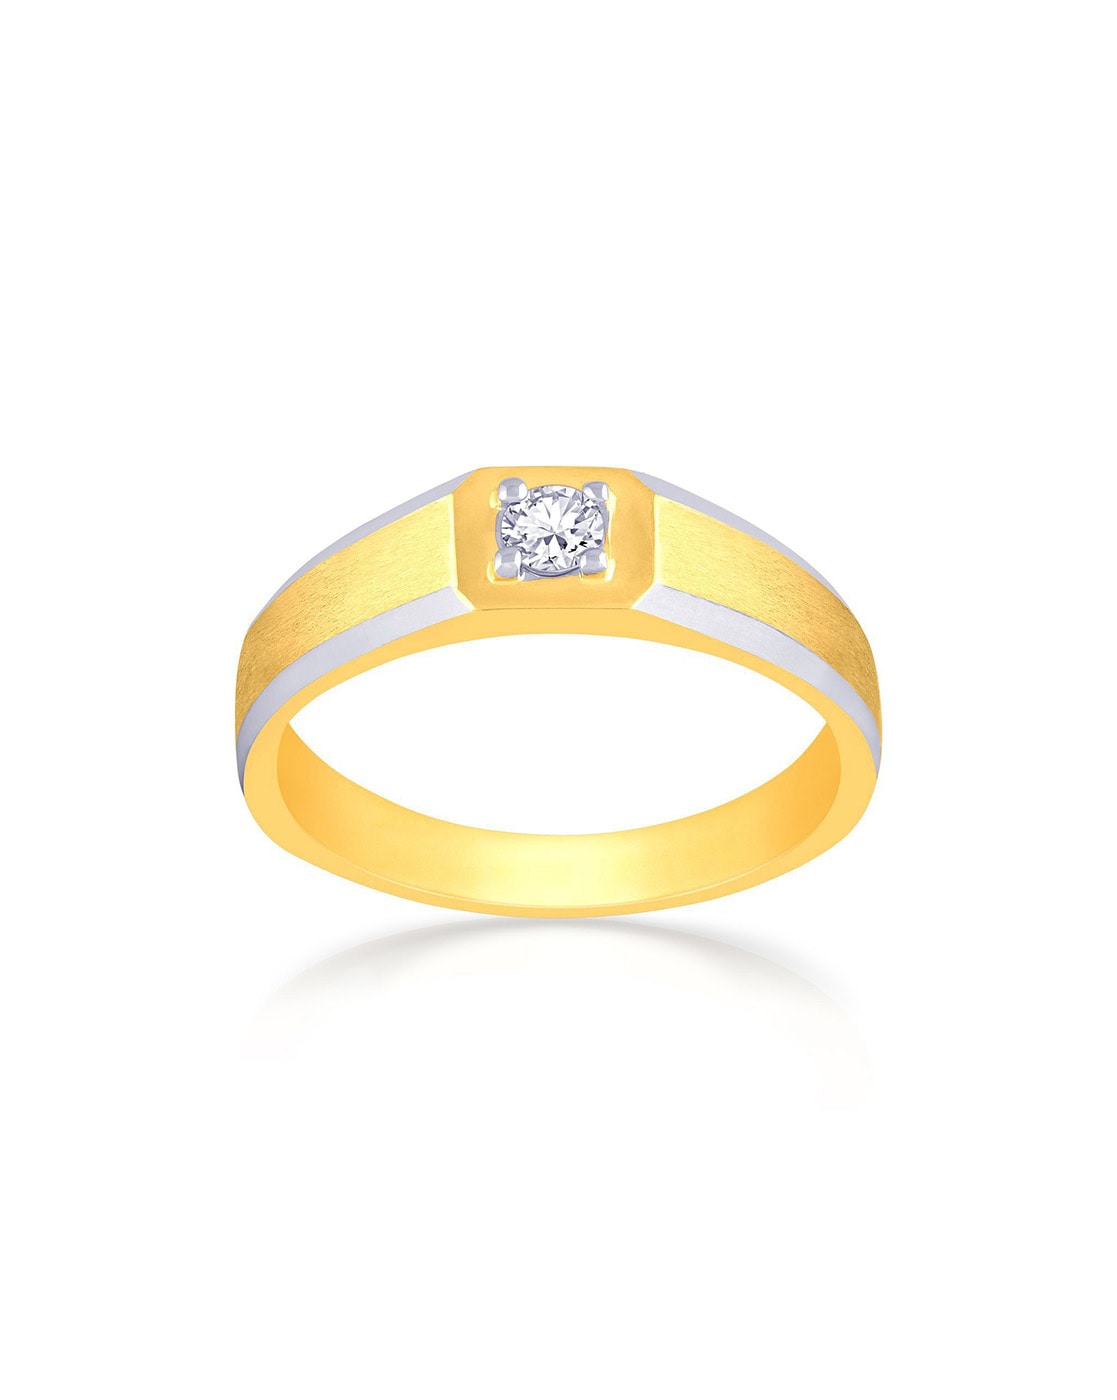 Buy Malabar Gold and Diamonds 22 KT (916) purity Yellow Gold Malabar Gold  Ring SKYFRDZ108_Y_8 for Women at Amazon.in